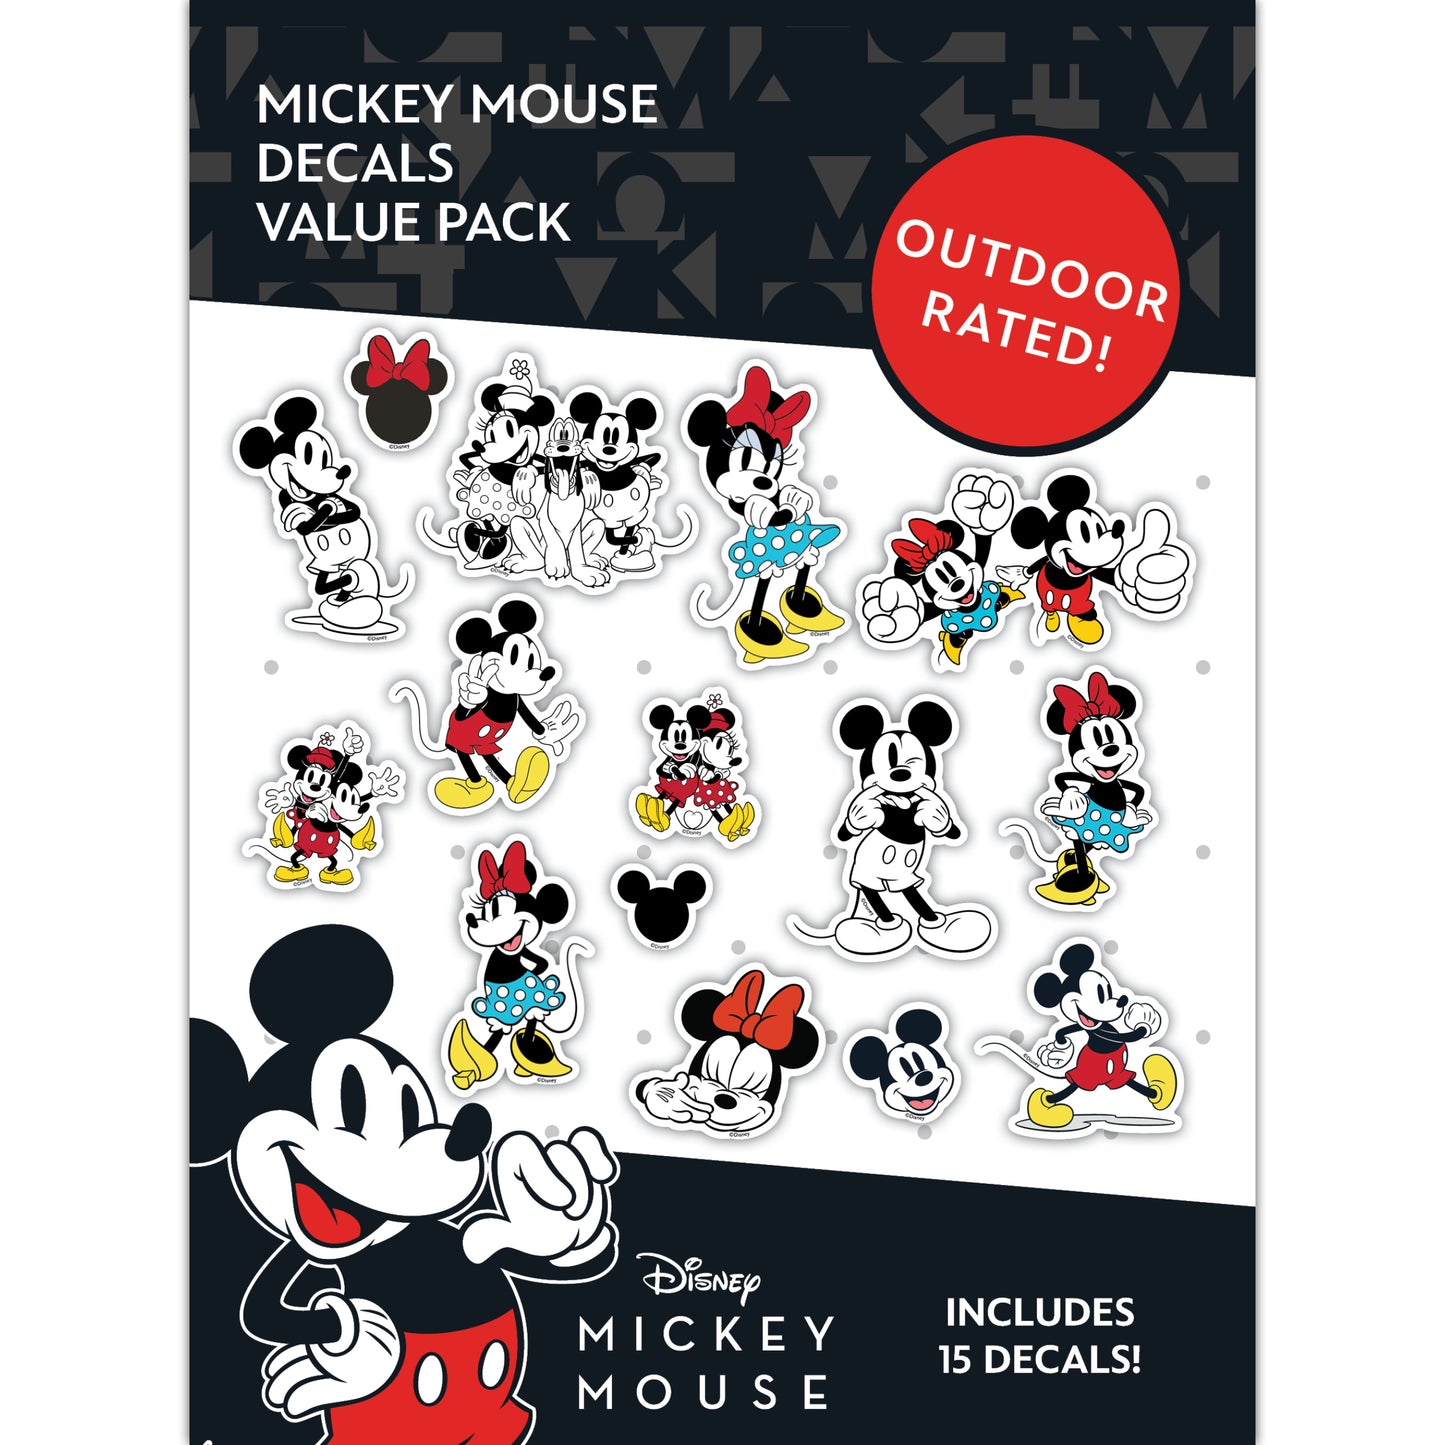 Disney Classic Mickey & Minnie Mouse Decals - Set of 15 Mickey and Minnie Mouse Waterproof Stickers